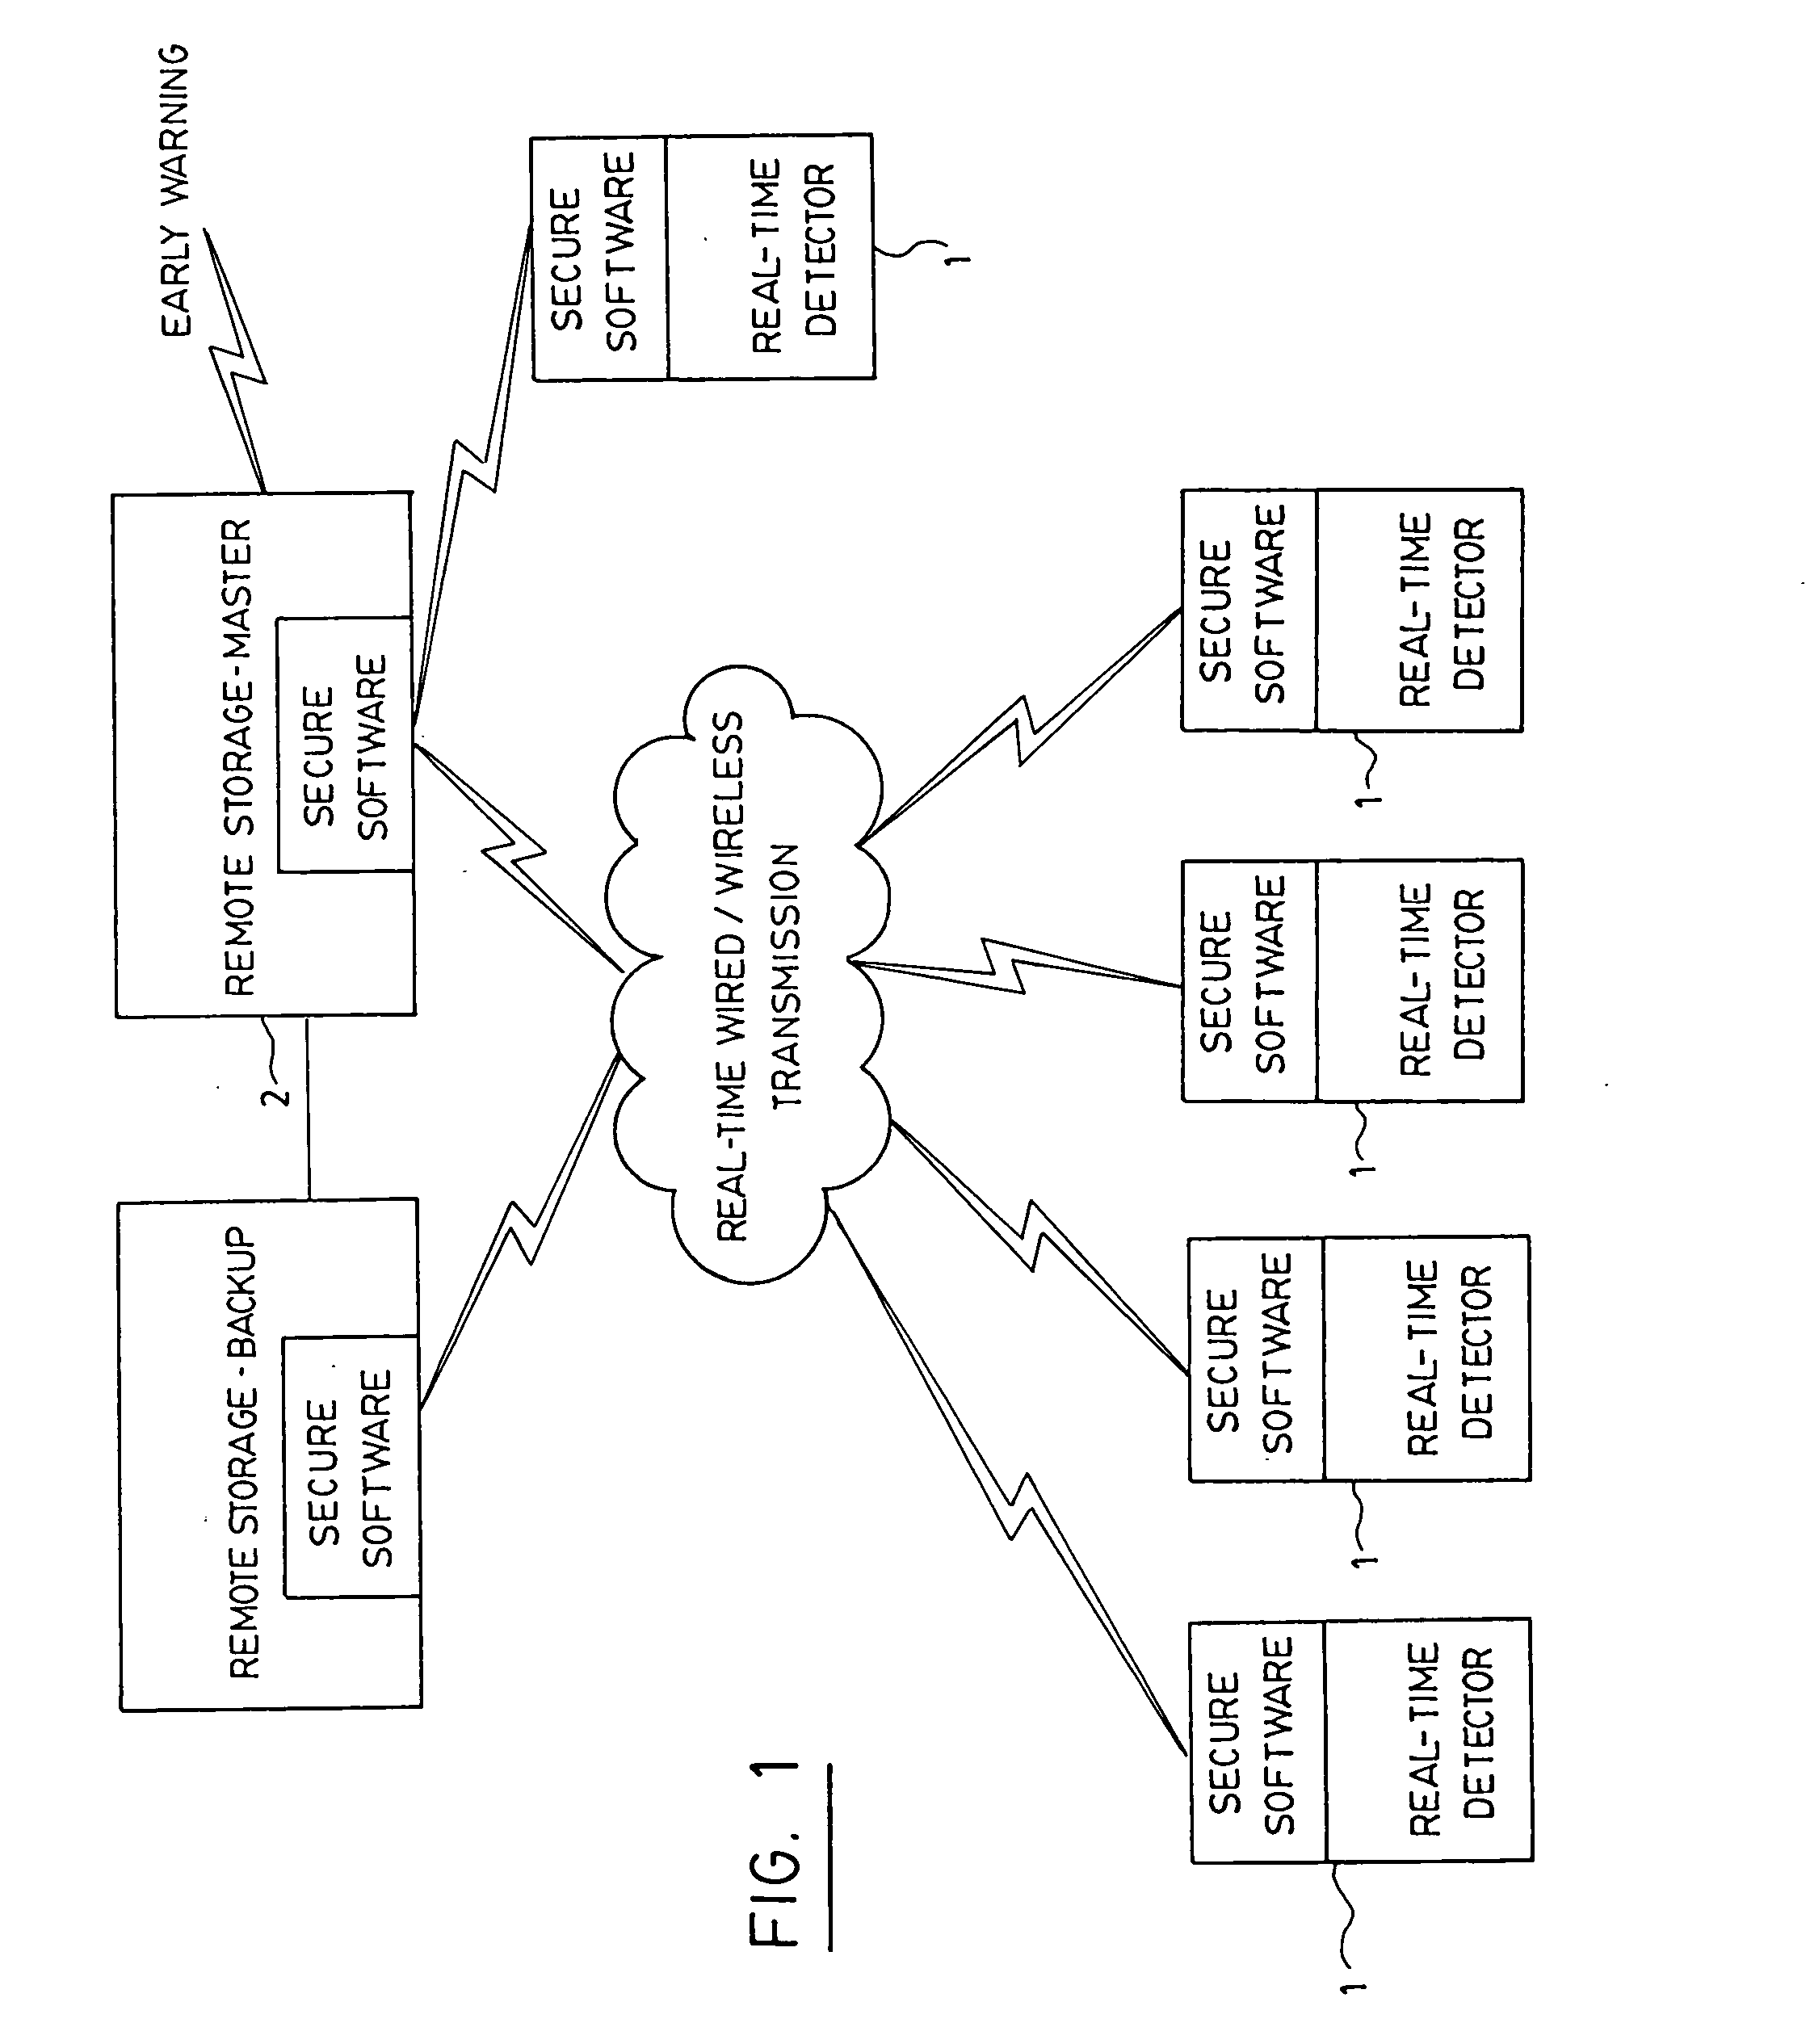 System and method for real-time detection and remote monitoring of pathogens